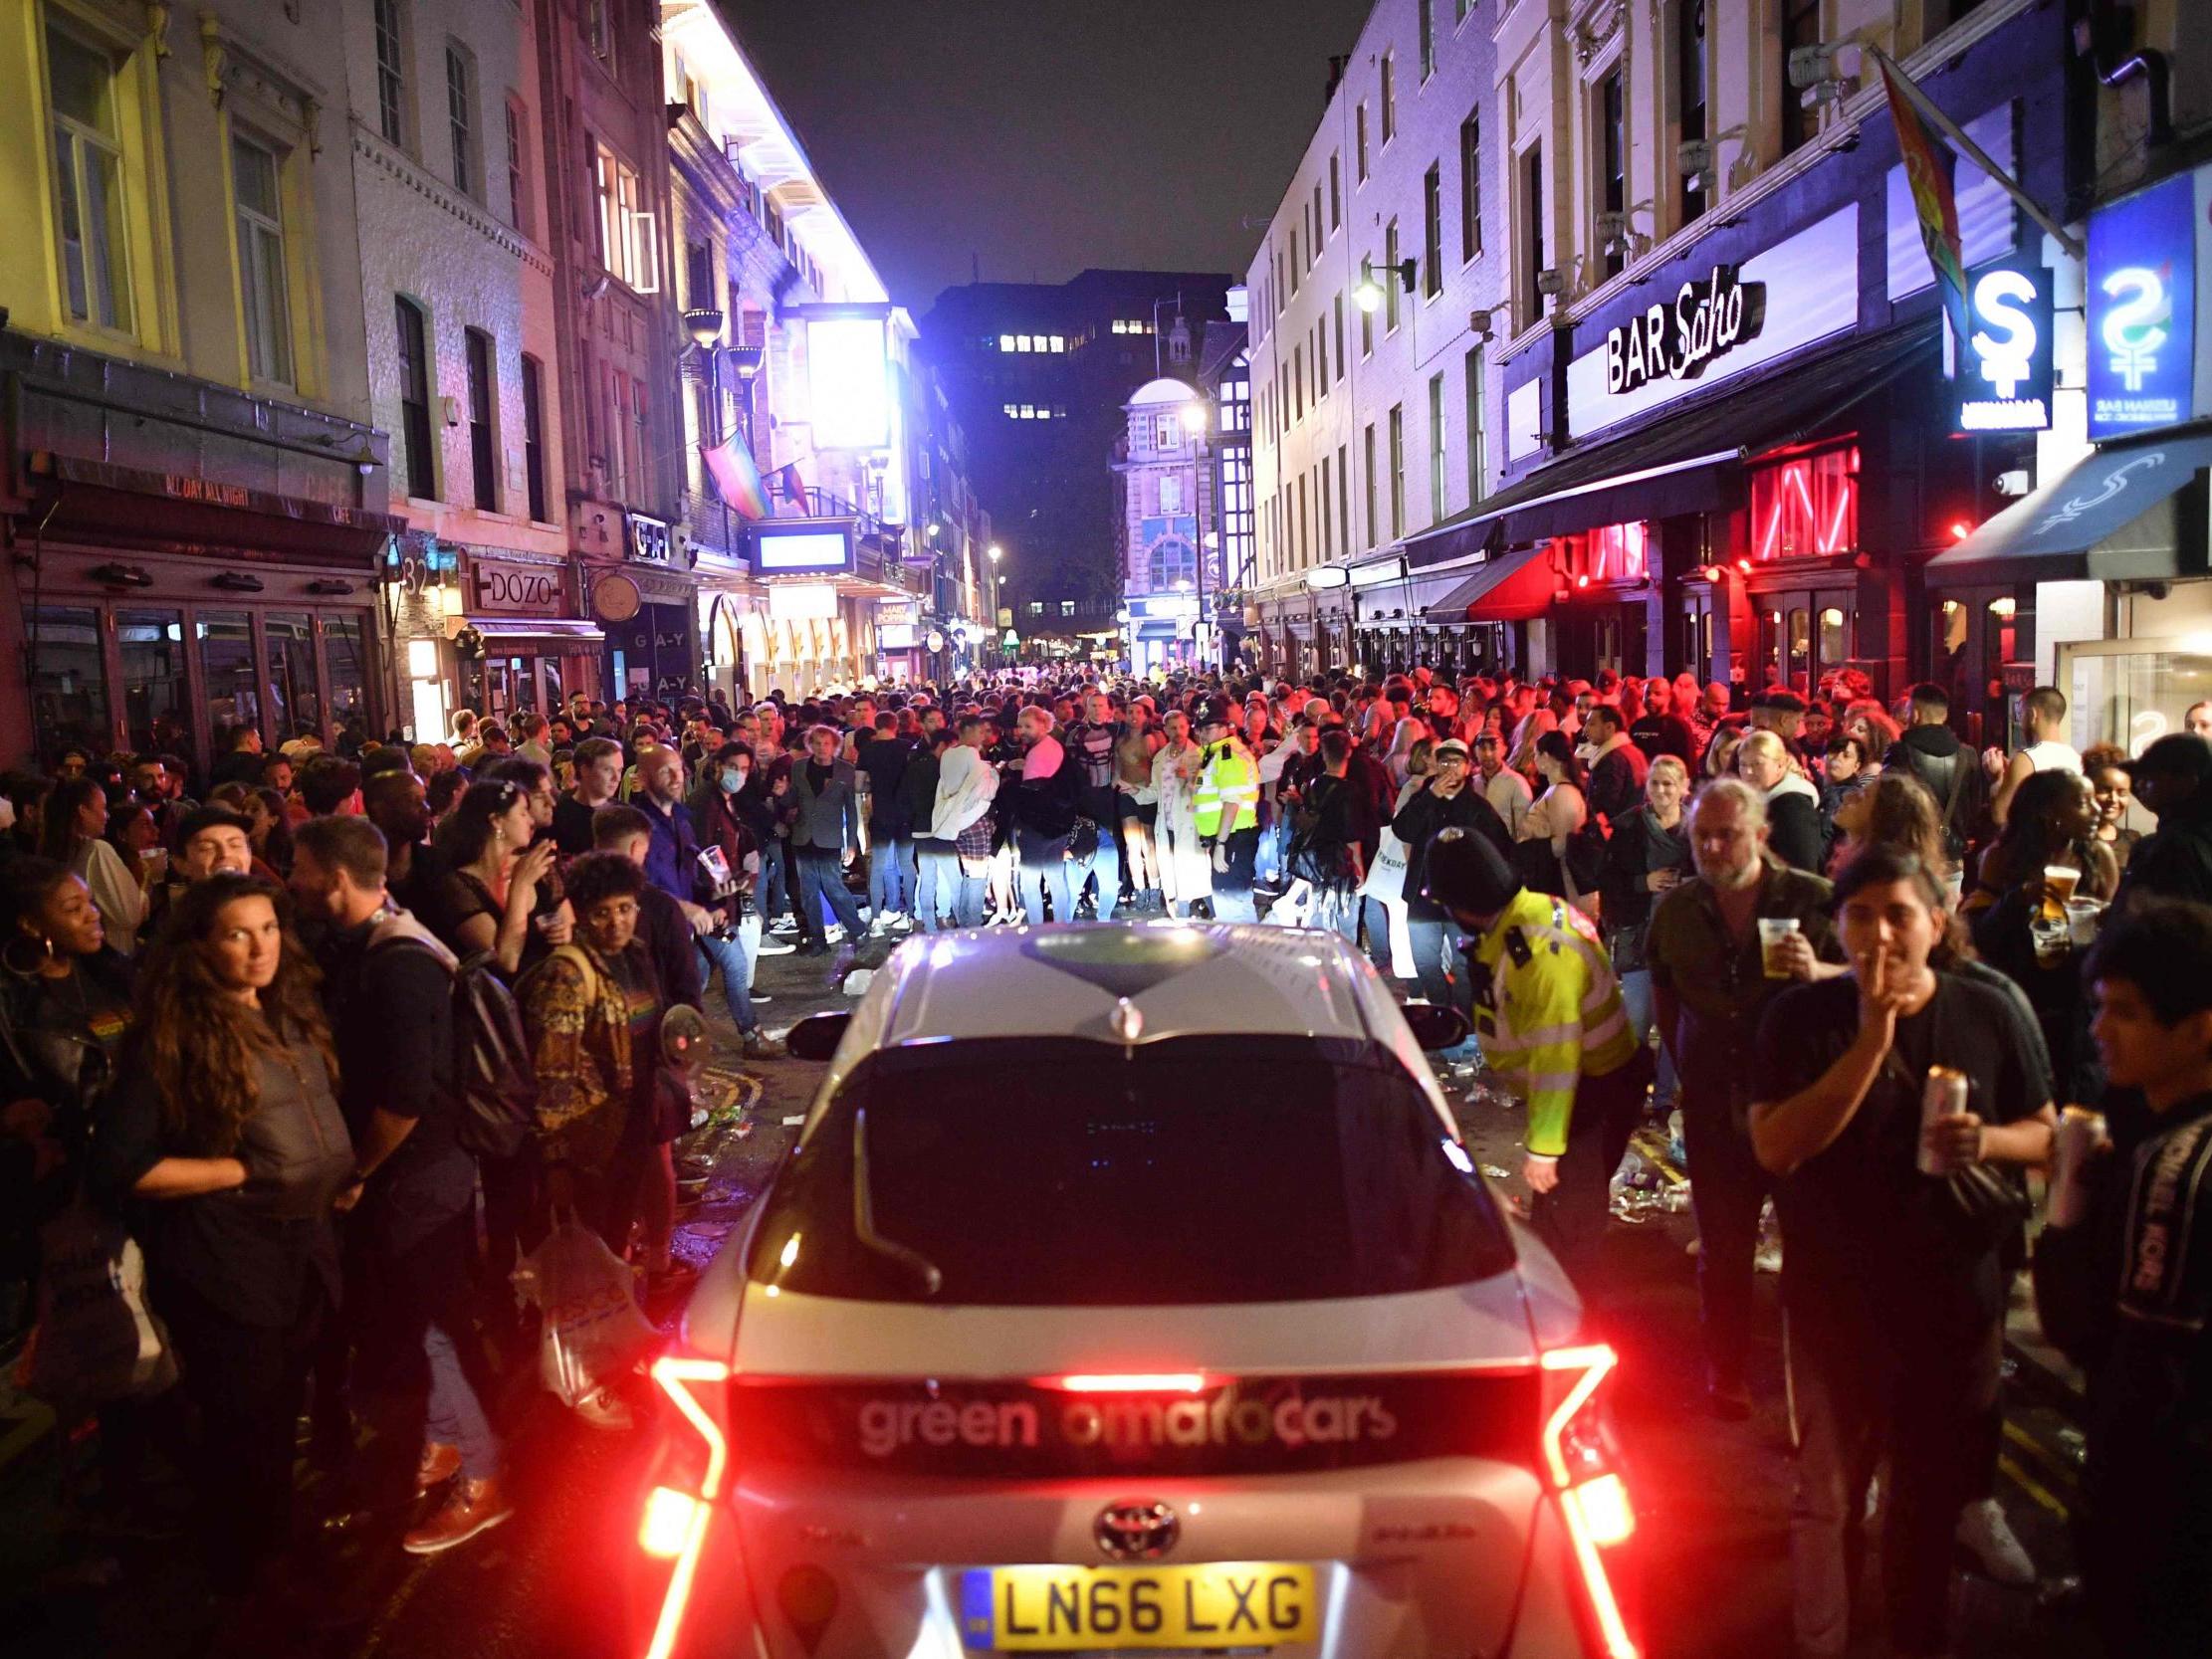 Revellers struggle to distance in Soho on the first day pubs and bars were allowed to reopen in England since lockdown began